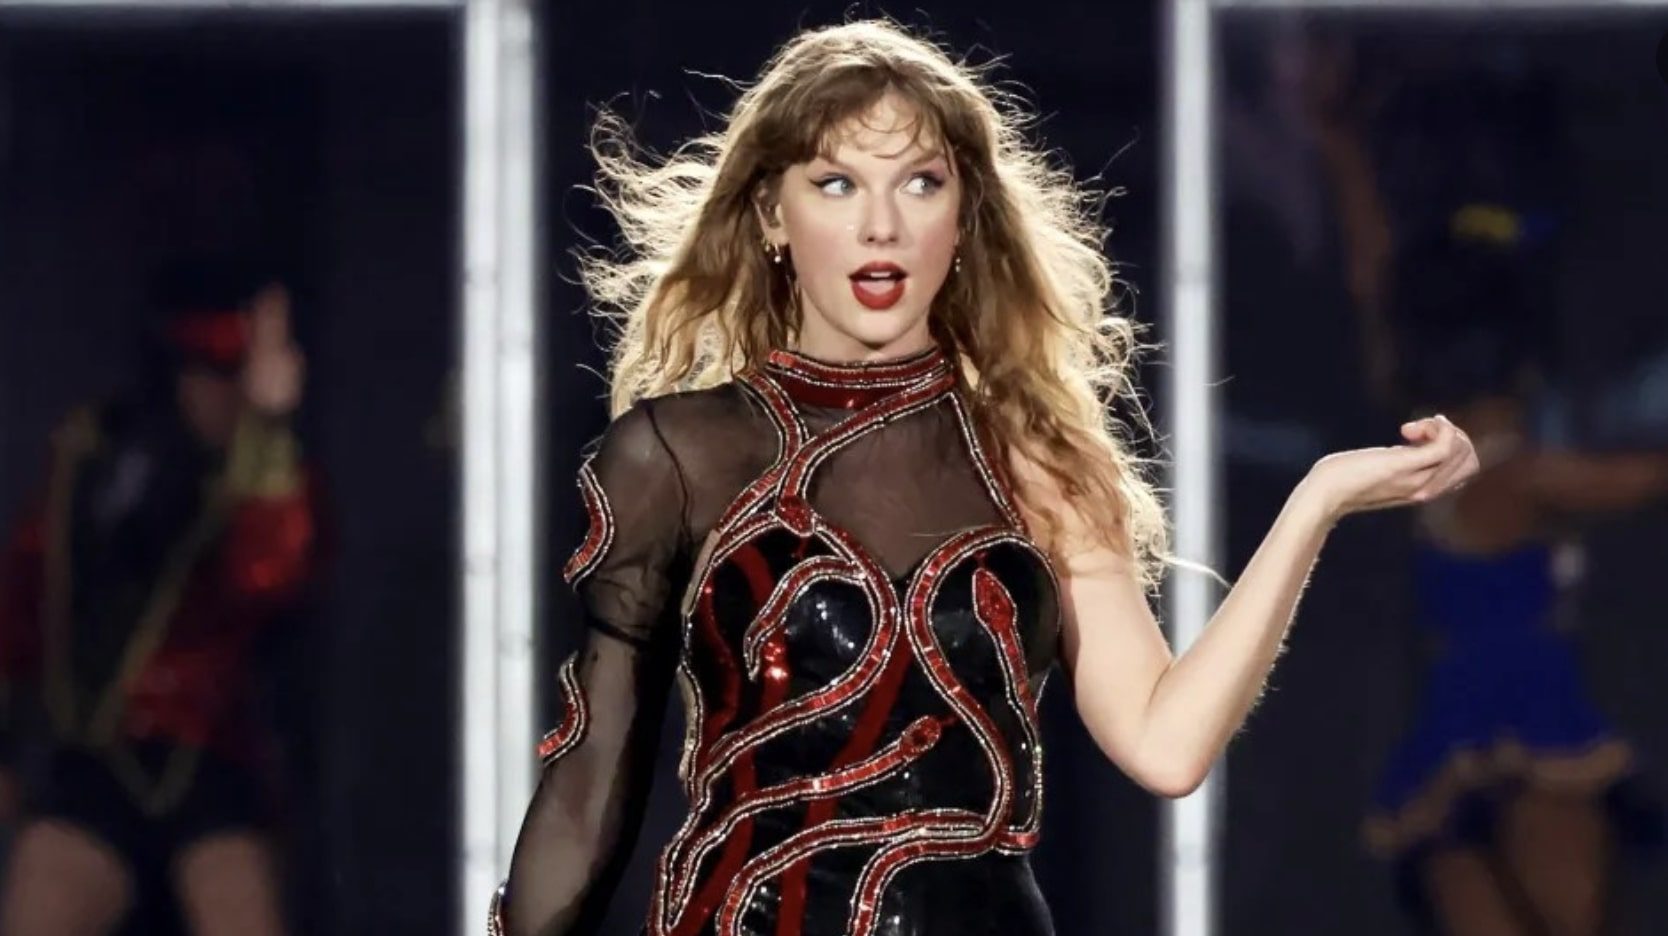 Swiftonomics boosted 35% UOB card billings; cardholders spent over S$30M on Eras Tour tickets